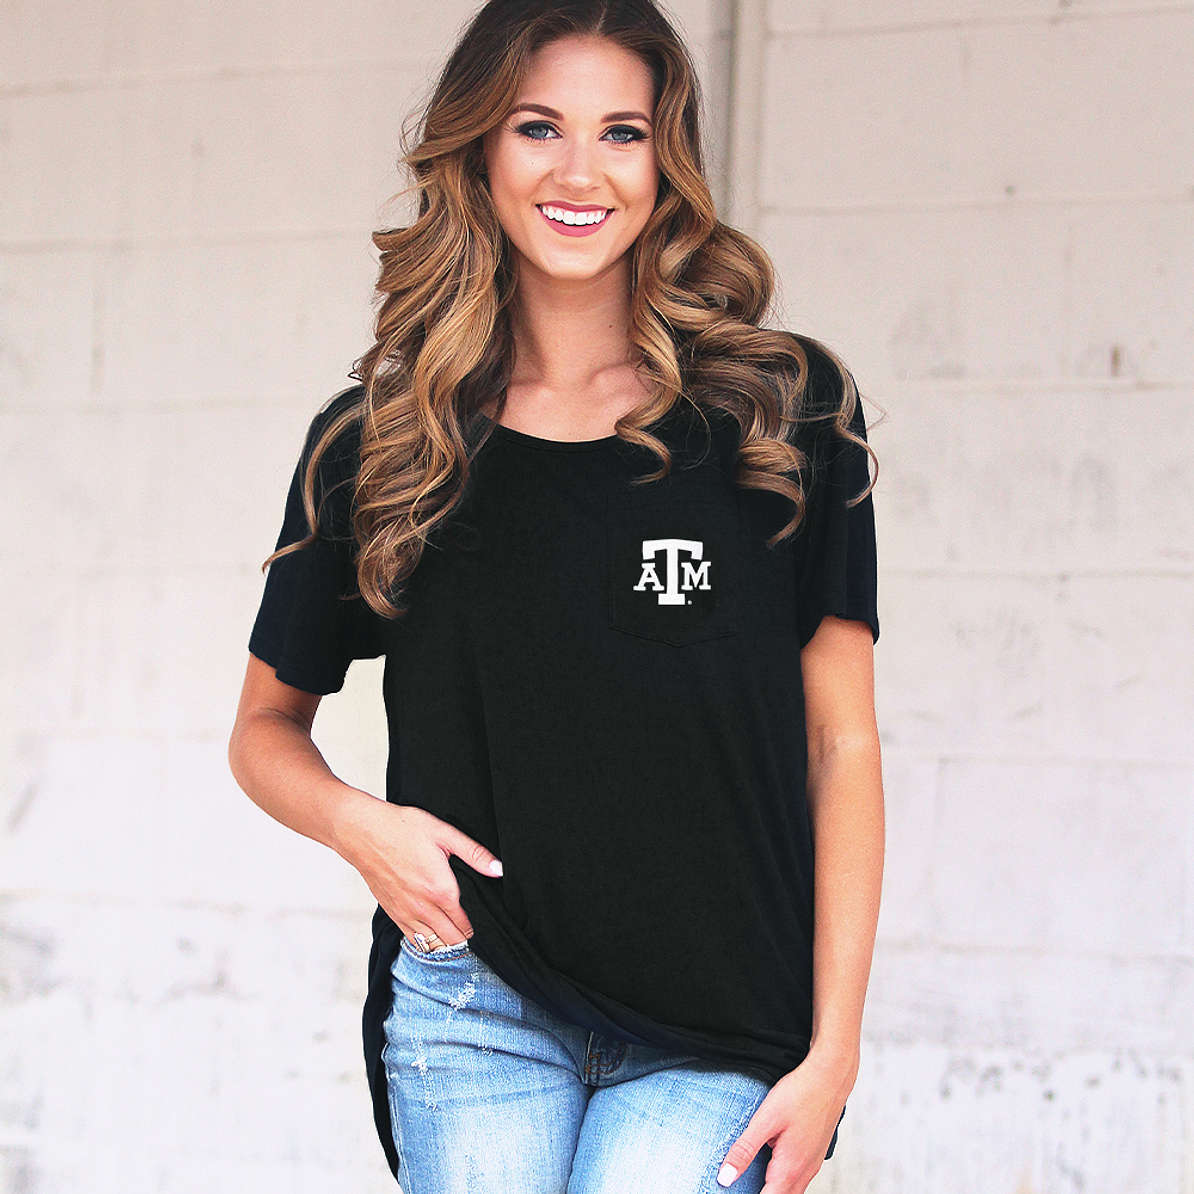 Texas A&M Aggies T-Shirts in Black and White – Marleylilly